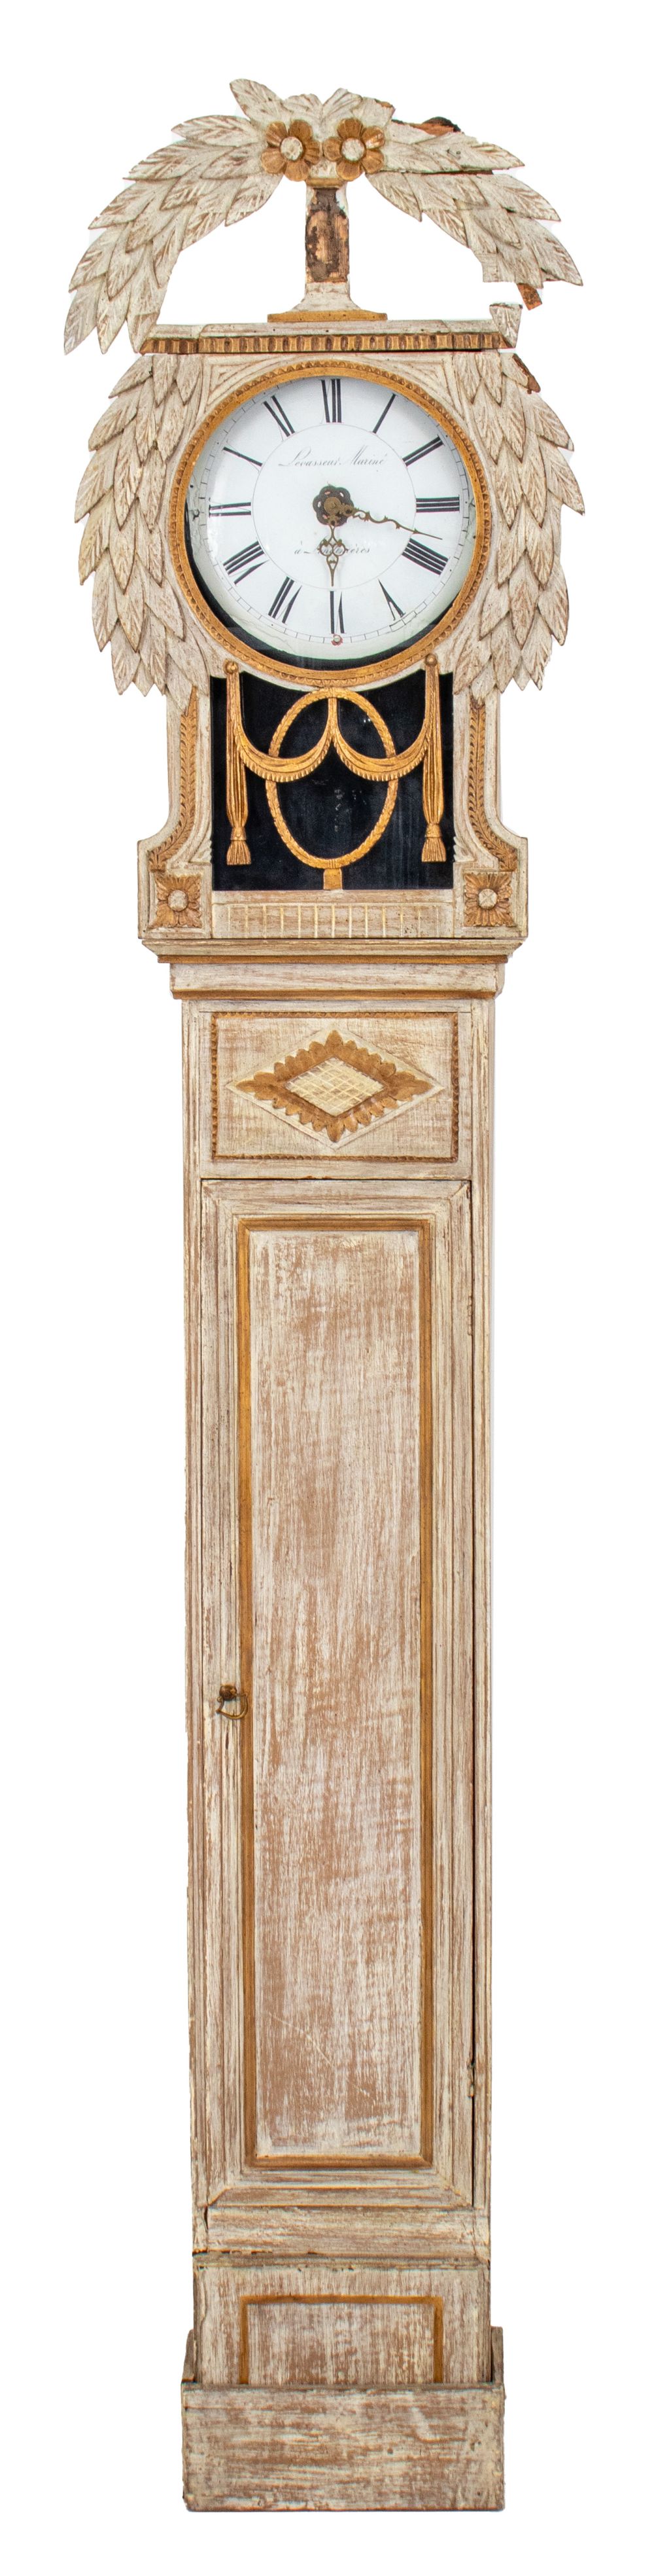 GUSTAVIAN NEOCLASSICAL STYLE TALL 360153